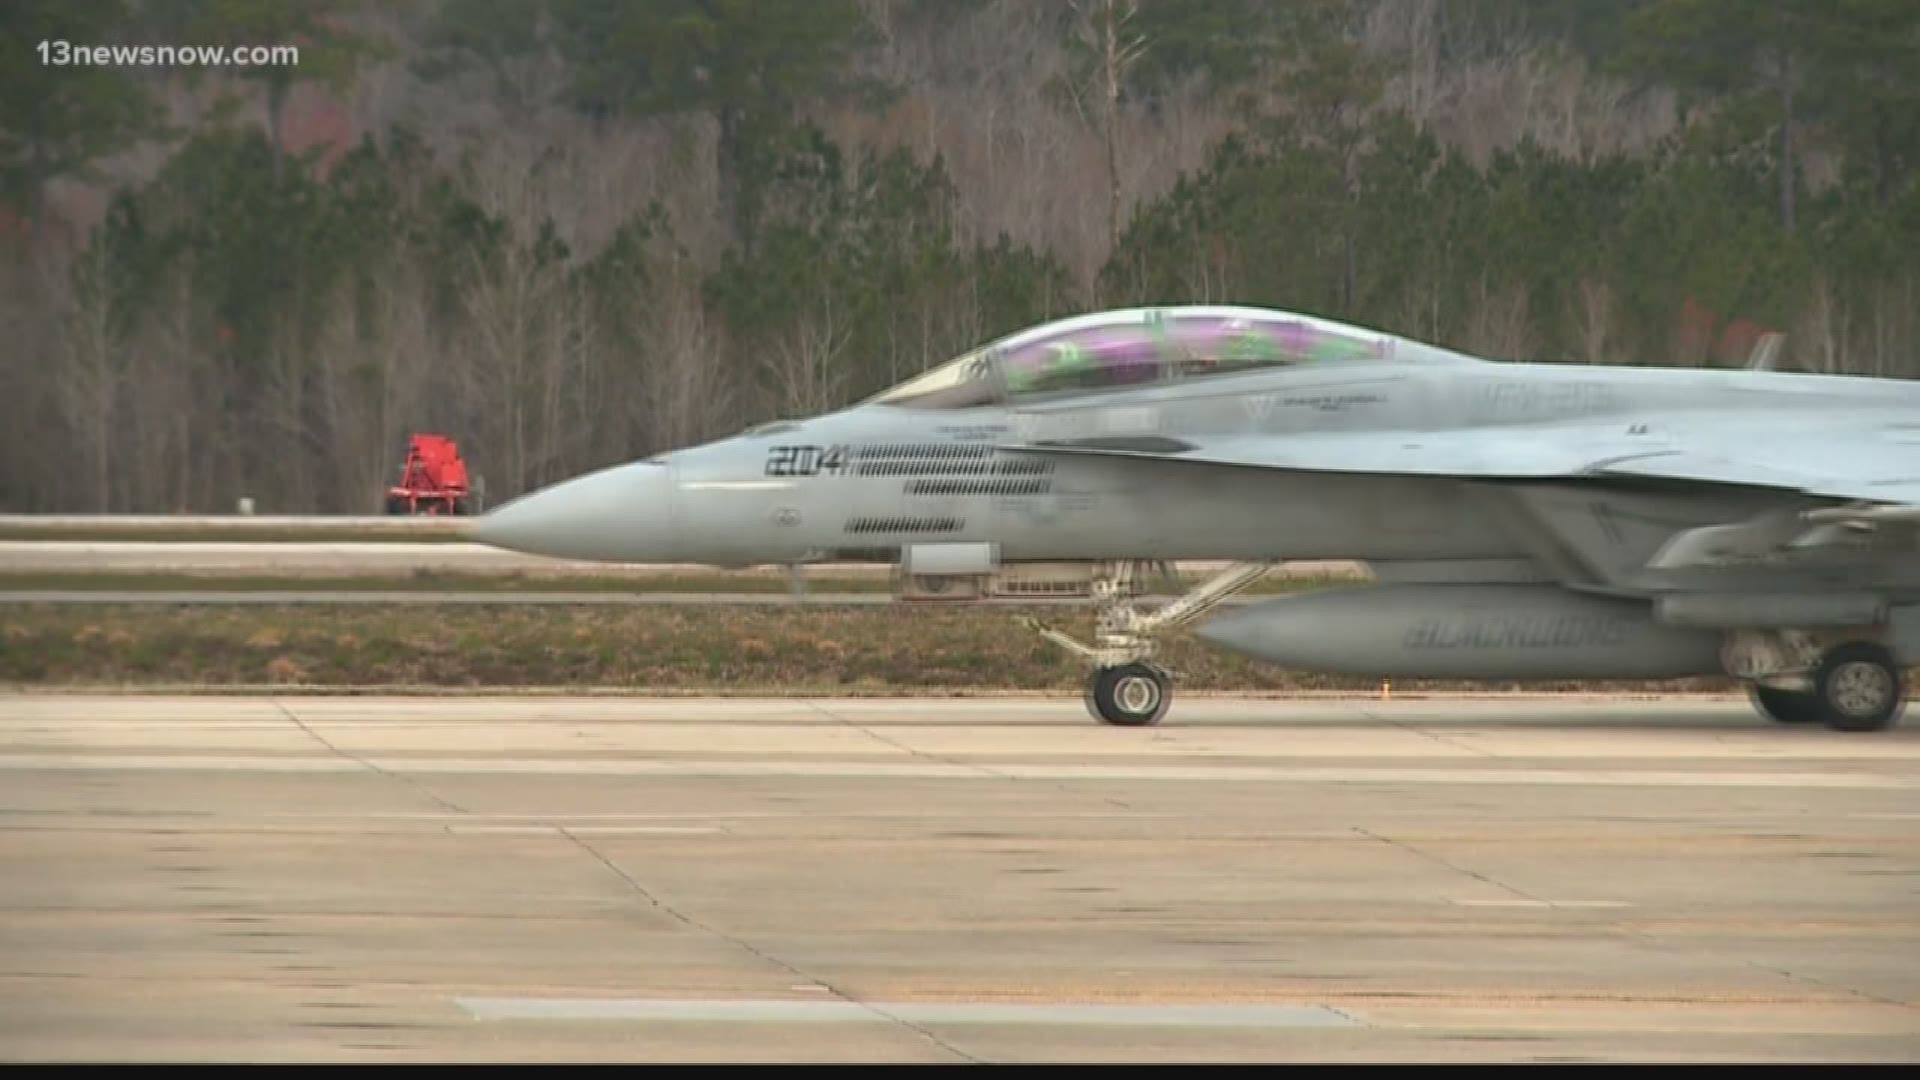 It was a bittersweet return for one local Navy Super Hornet squadron.